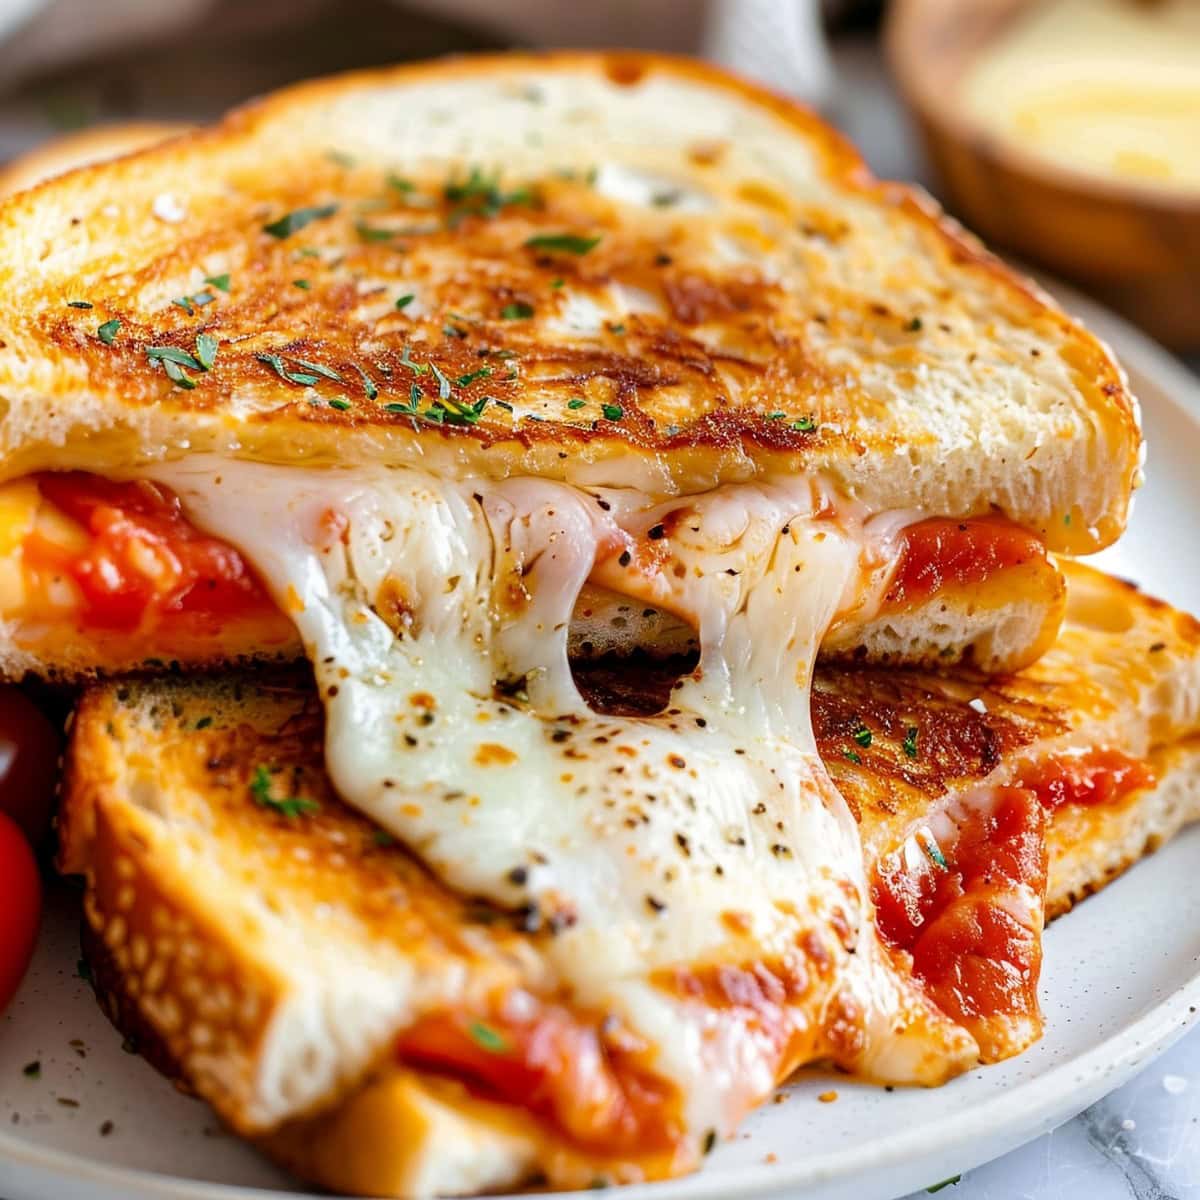 Mouthwatering pizza-inspired grilled cheese with pepperoni, a delicious fusion of two favorite comfort foods